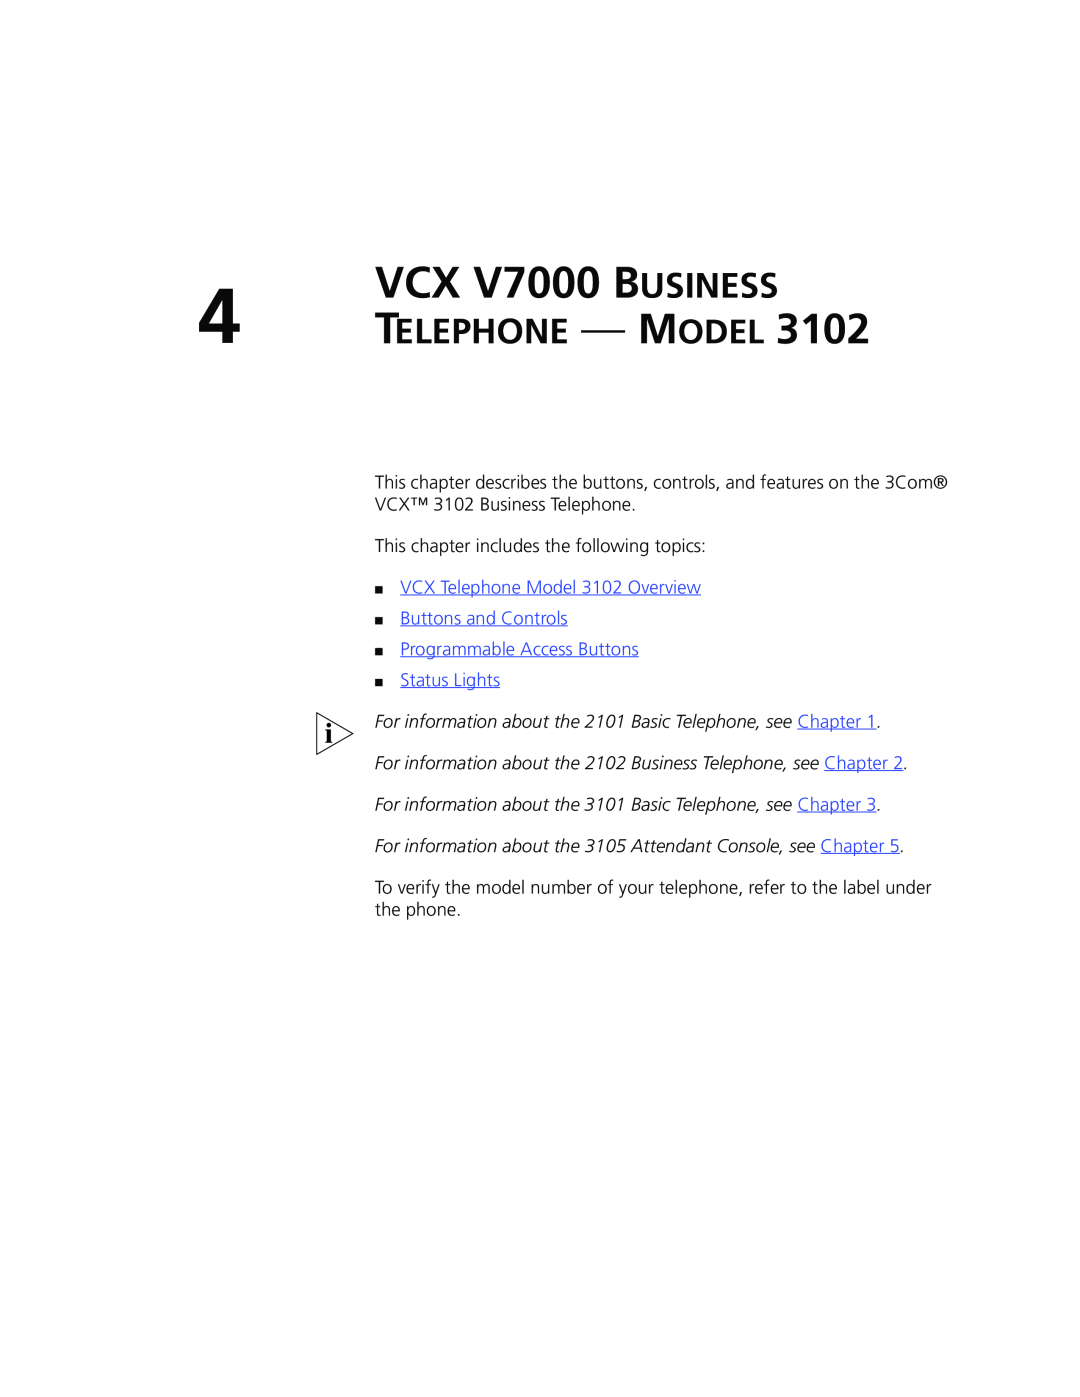 3Com manual VCX V7000 BUSINESS, Telephone - Model, VCX Telephone Model 3102 Overview Buttons and Controls 